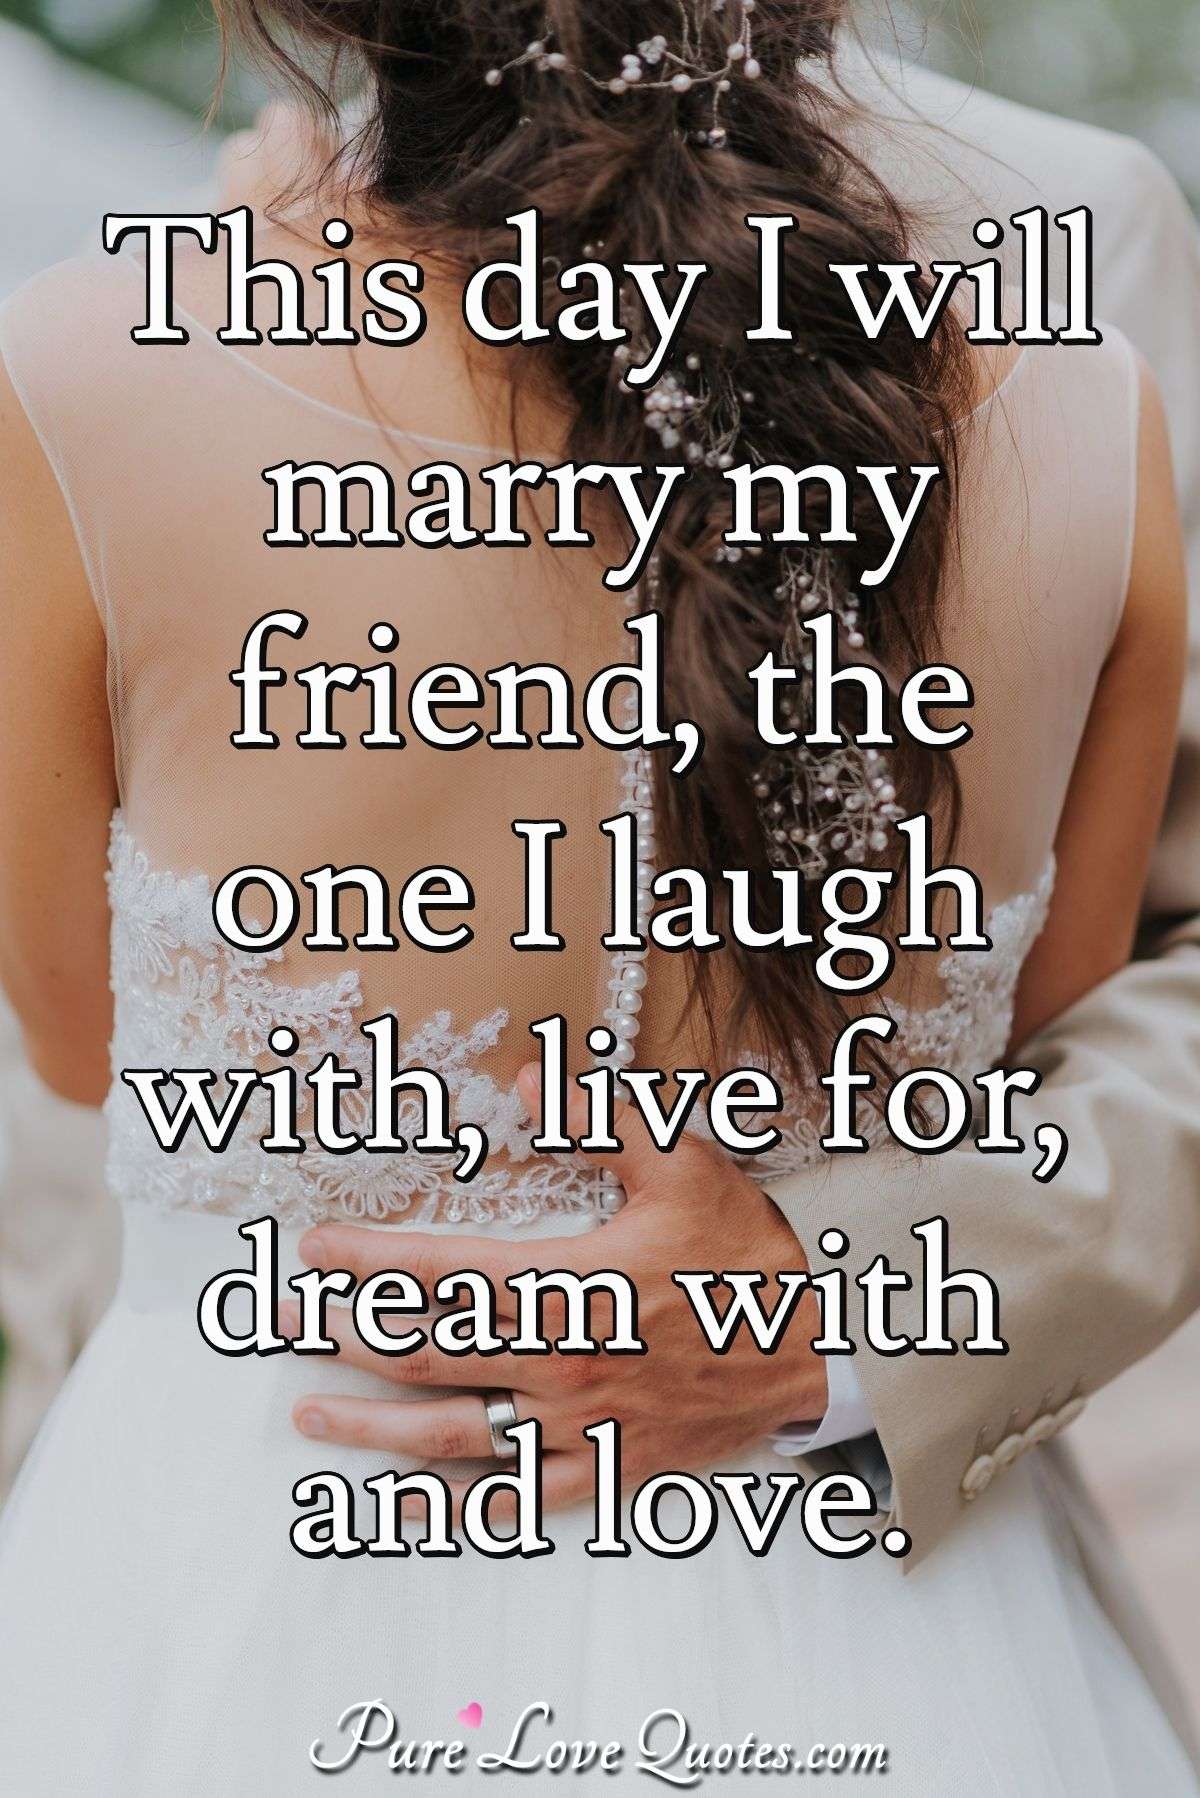 This day I will marry my friend, the one I laugh with, live for, dream with and love. - Anonymous